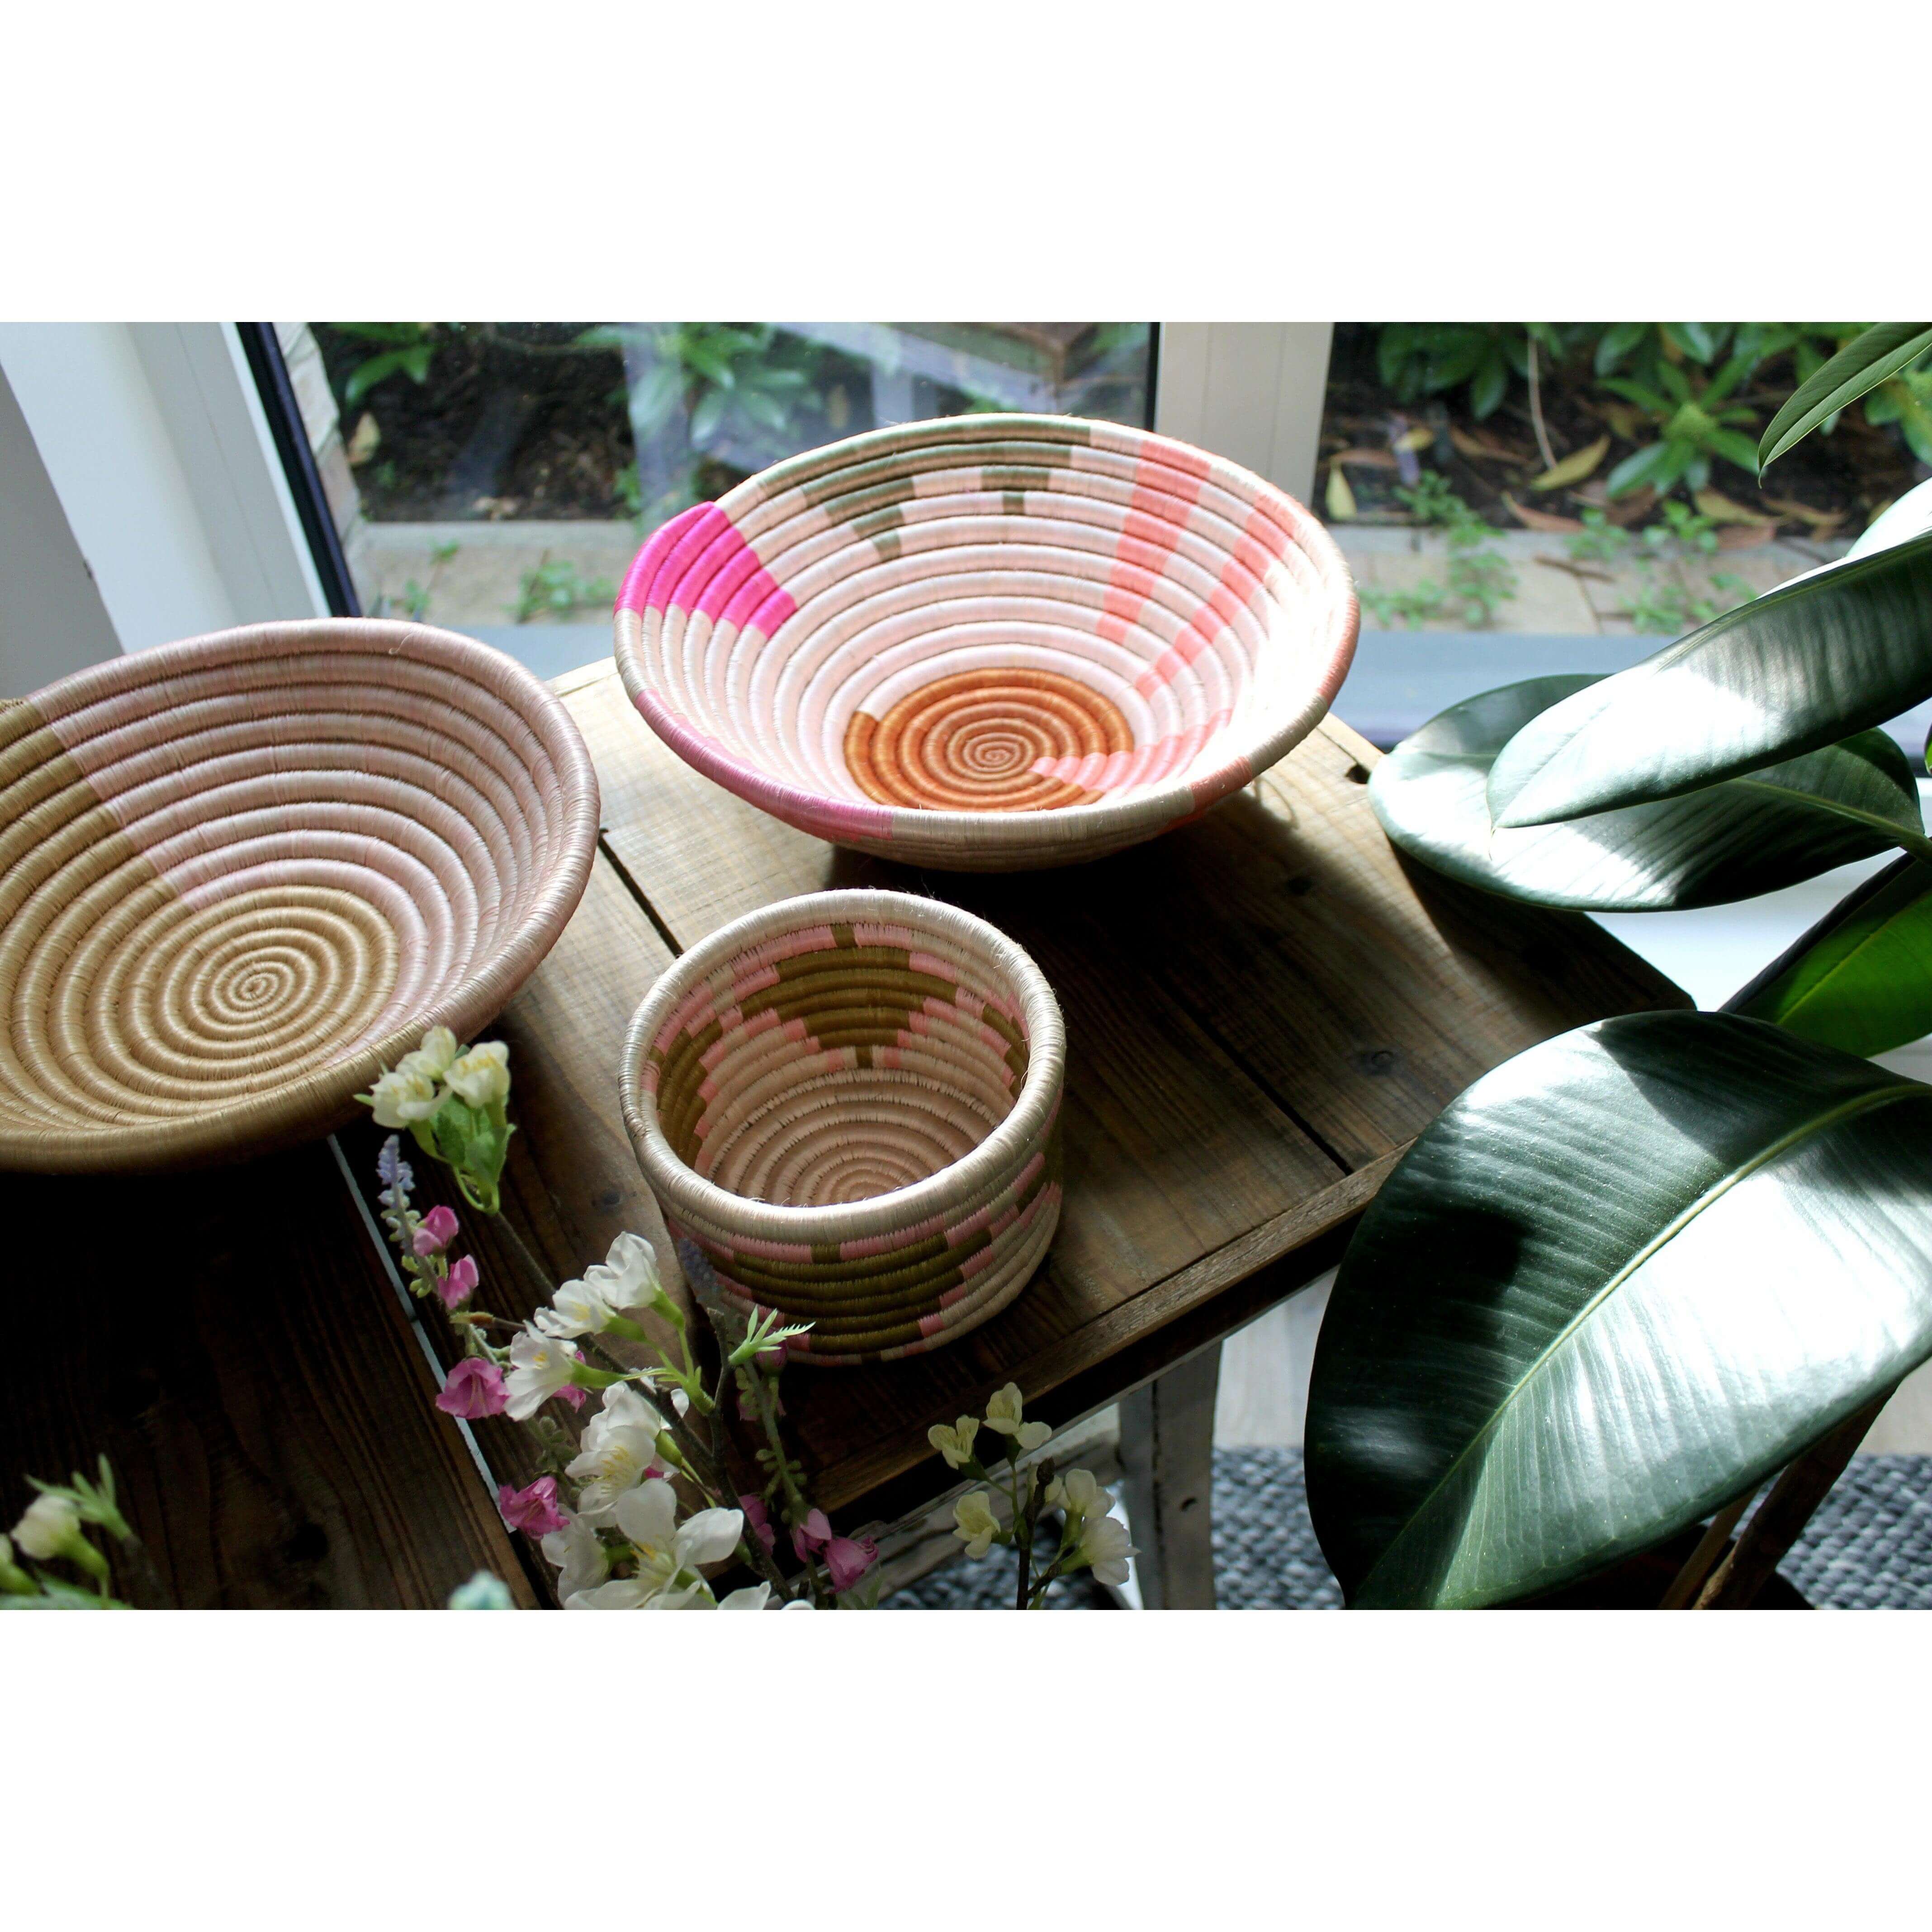 Handcrafted woven bowls as home decor